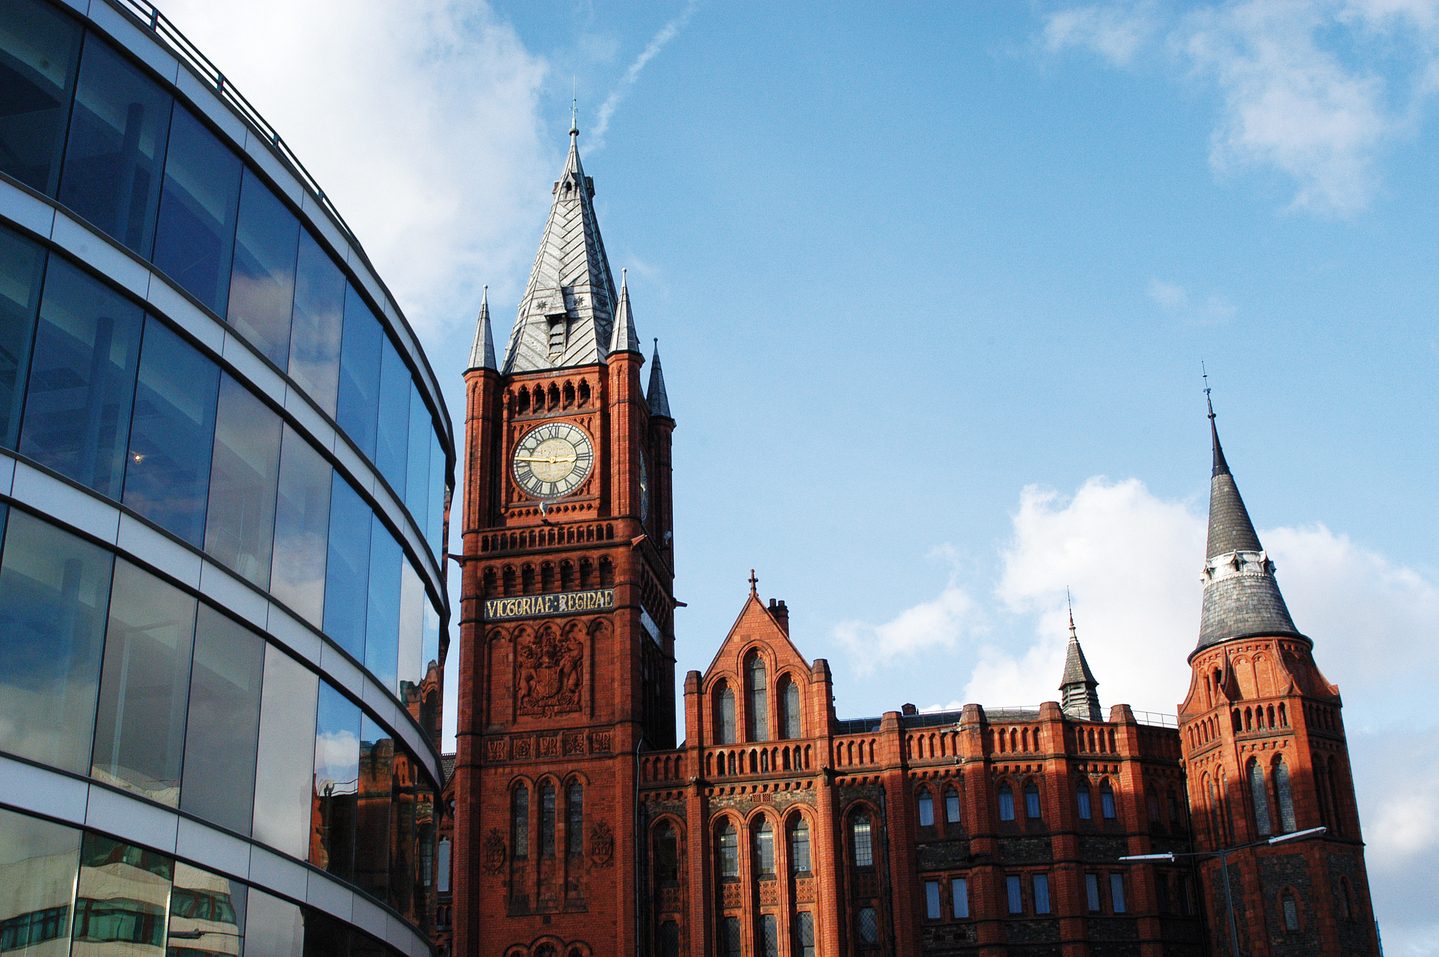 The famous red brick clock in Liverpool